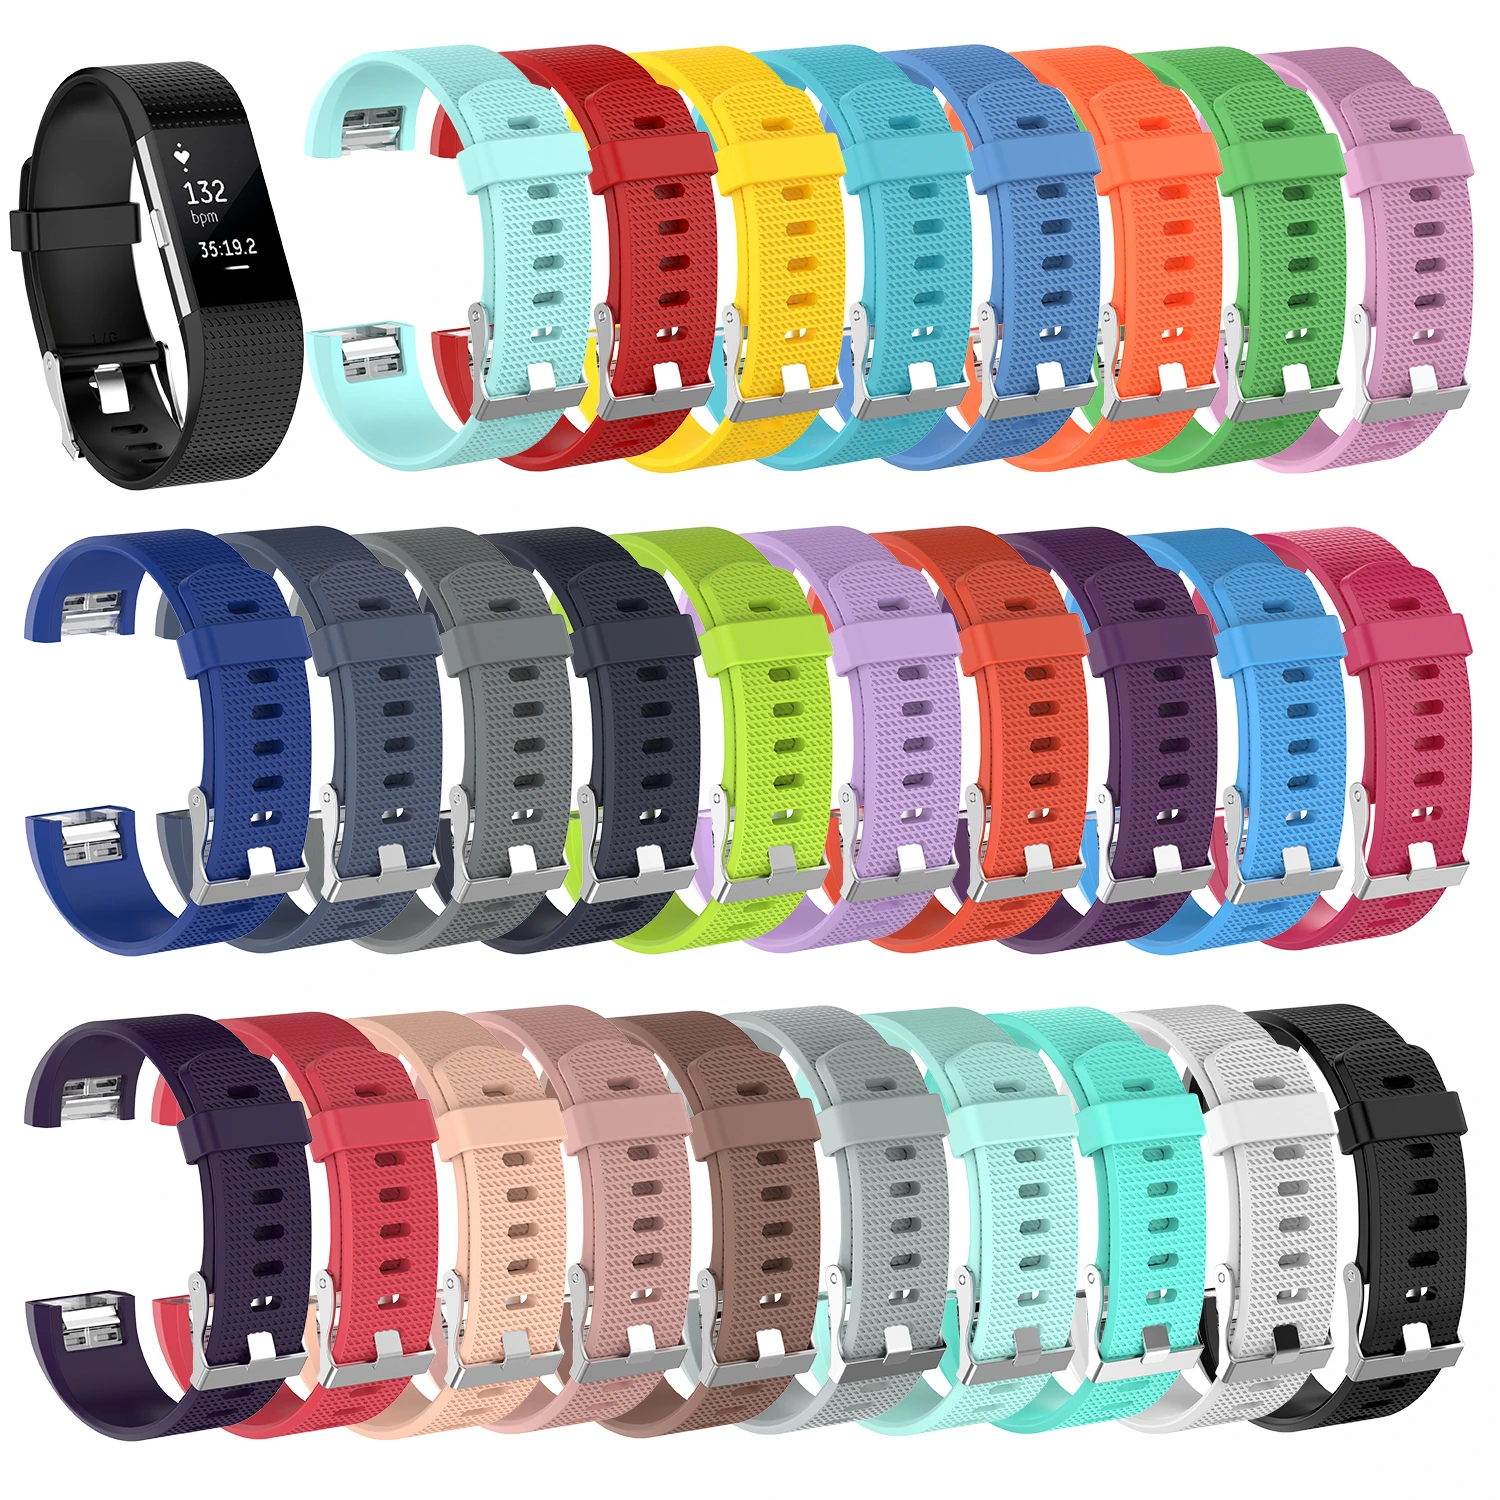 Large Replacement Wristband For Fitbit Charge 2 Band Silicone Fitness Small 